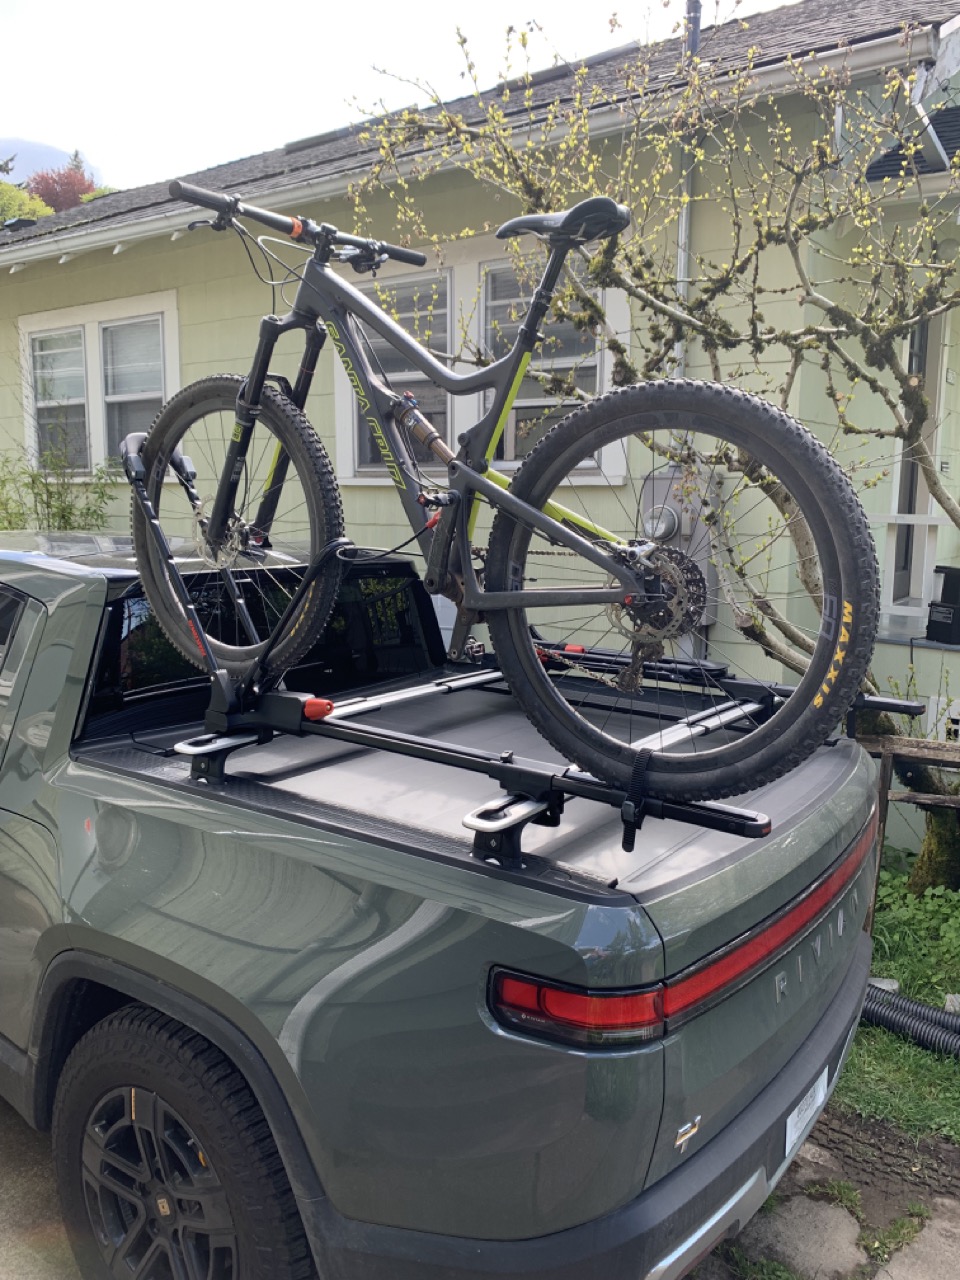 Rivian R1T R1S Found good bike mount option for Rivian R1T using Yakima Frontloader angle rear_74 in total length